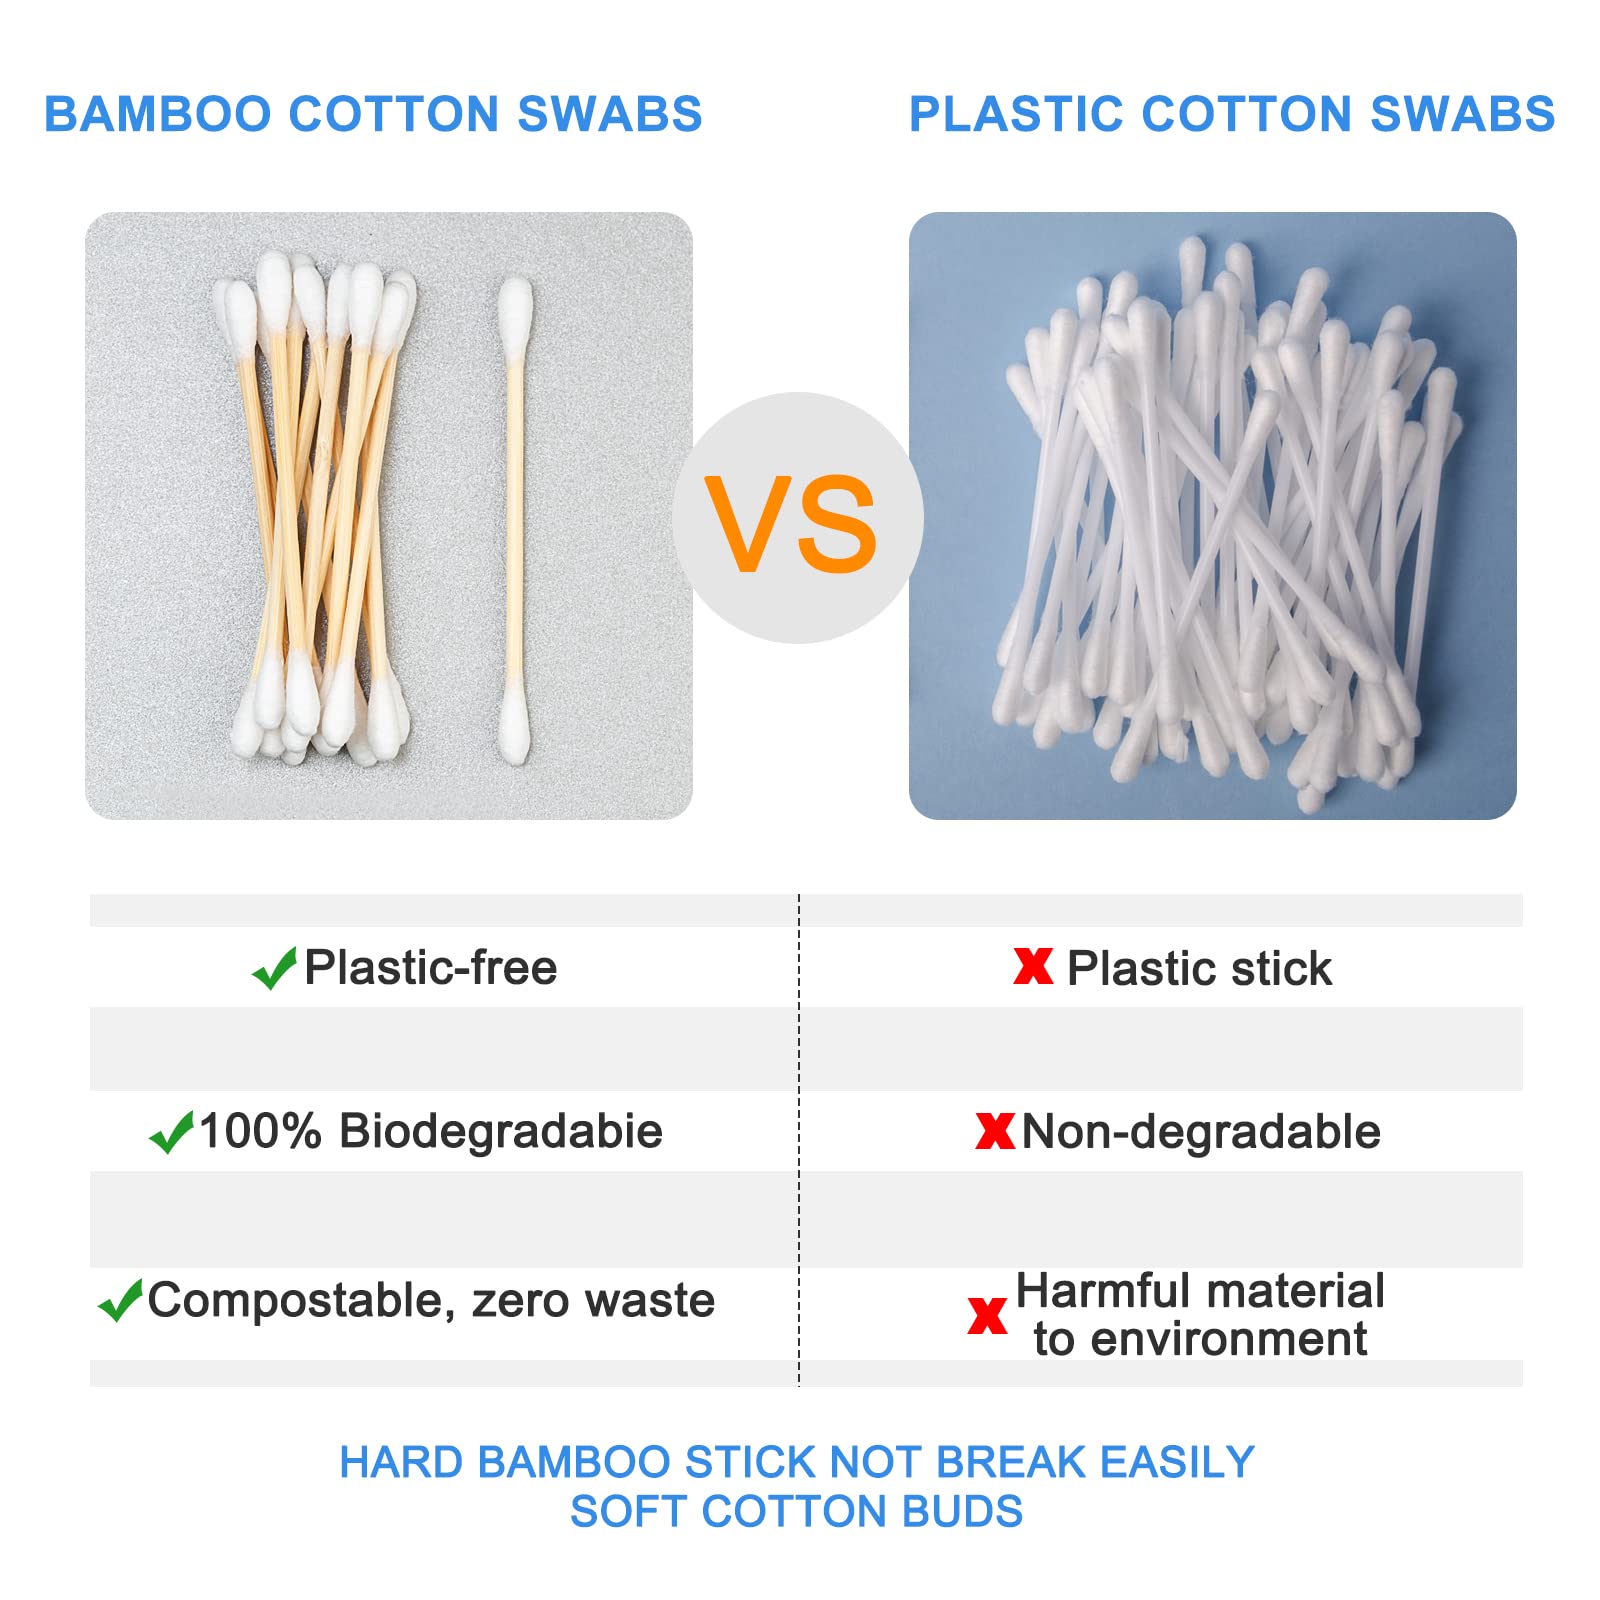 300 PCS Bamboo Cotton Swabs & Long Cotton Swab Set - Eyxformula Biodegradable Natural Cotton Swabs With Wooden Sticks - Double-tipped Cotton Swabs For Ears Cleaning, Makeup, Art & Craft